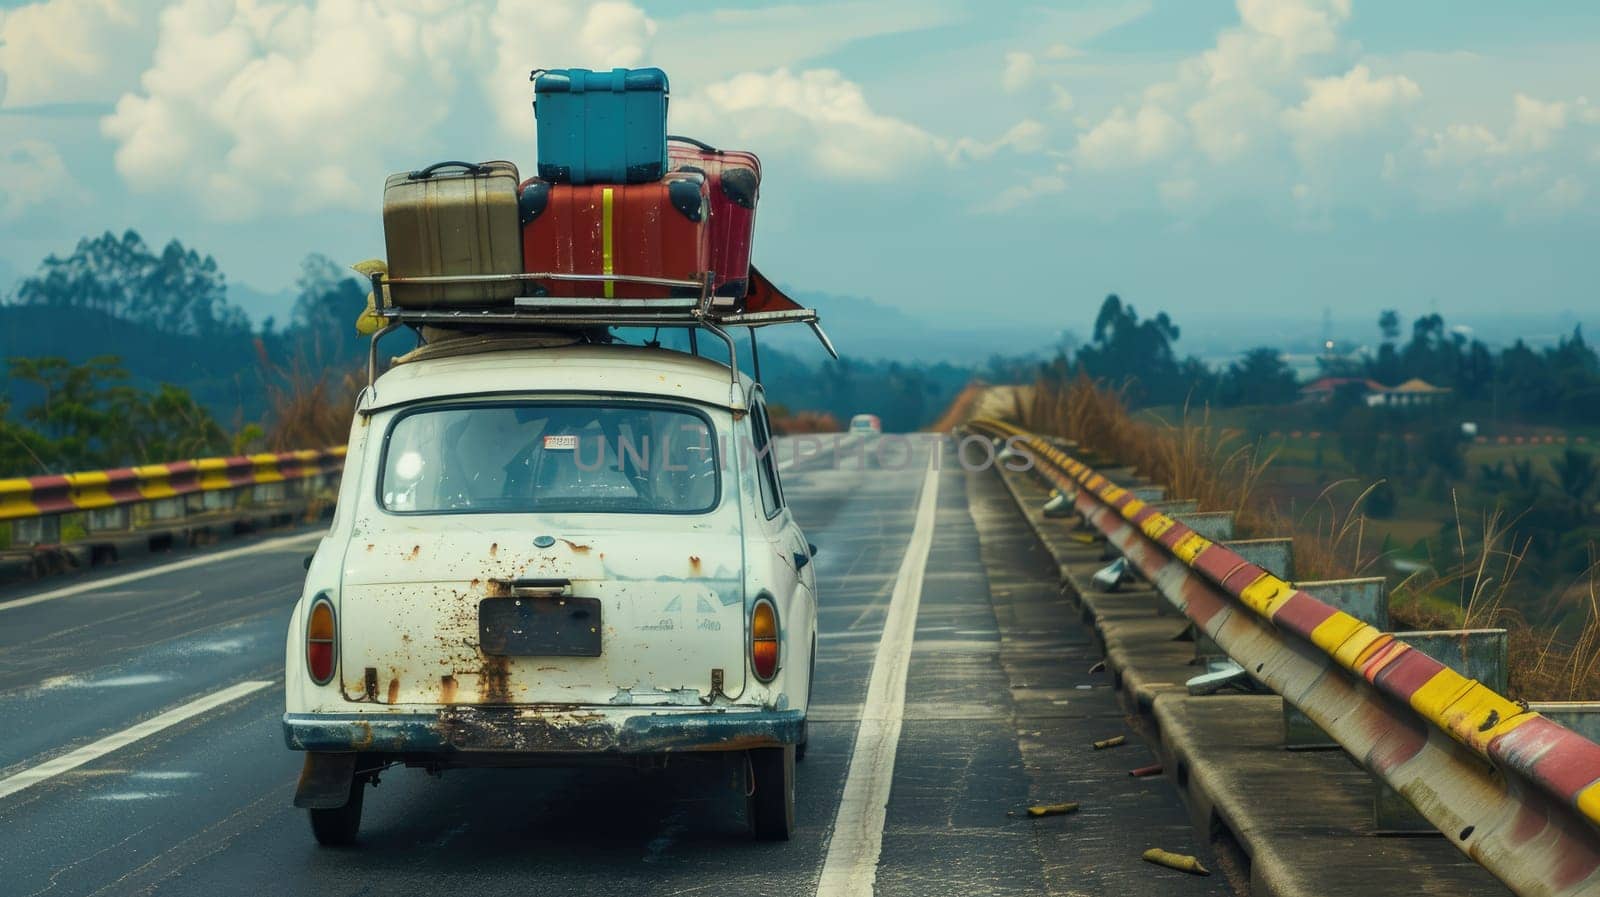 A car with luggage strapped on top with rural road landscape by nijieimu